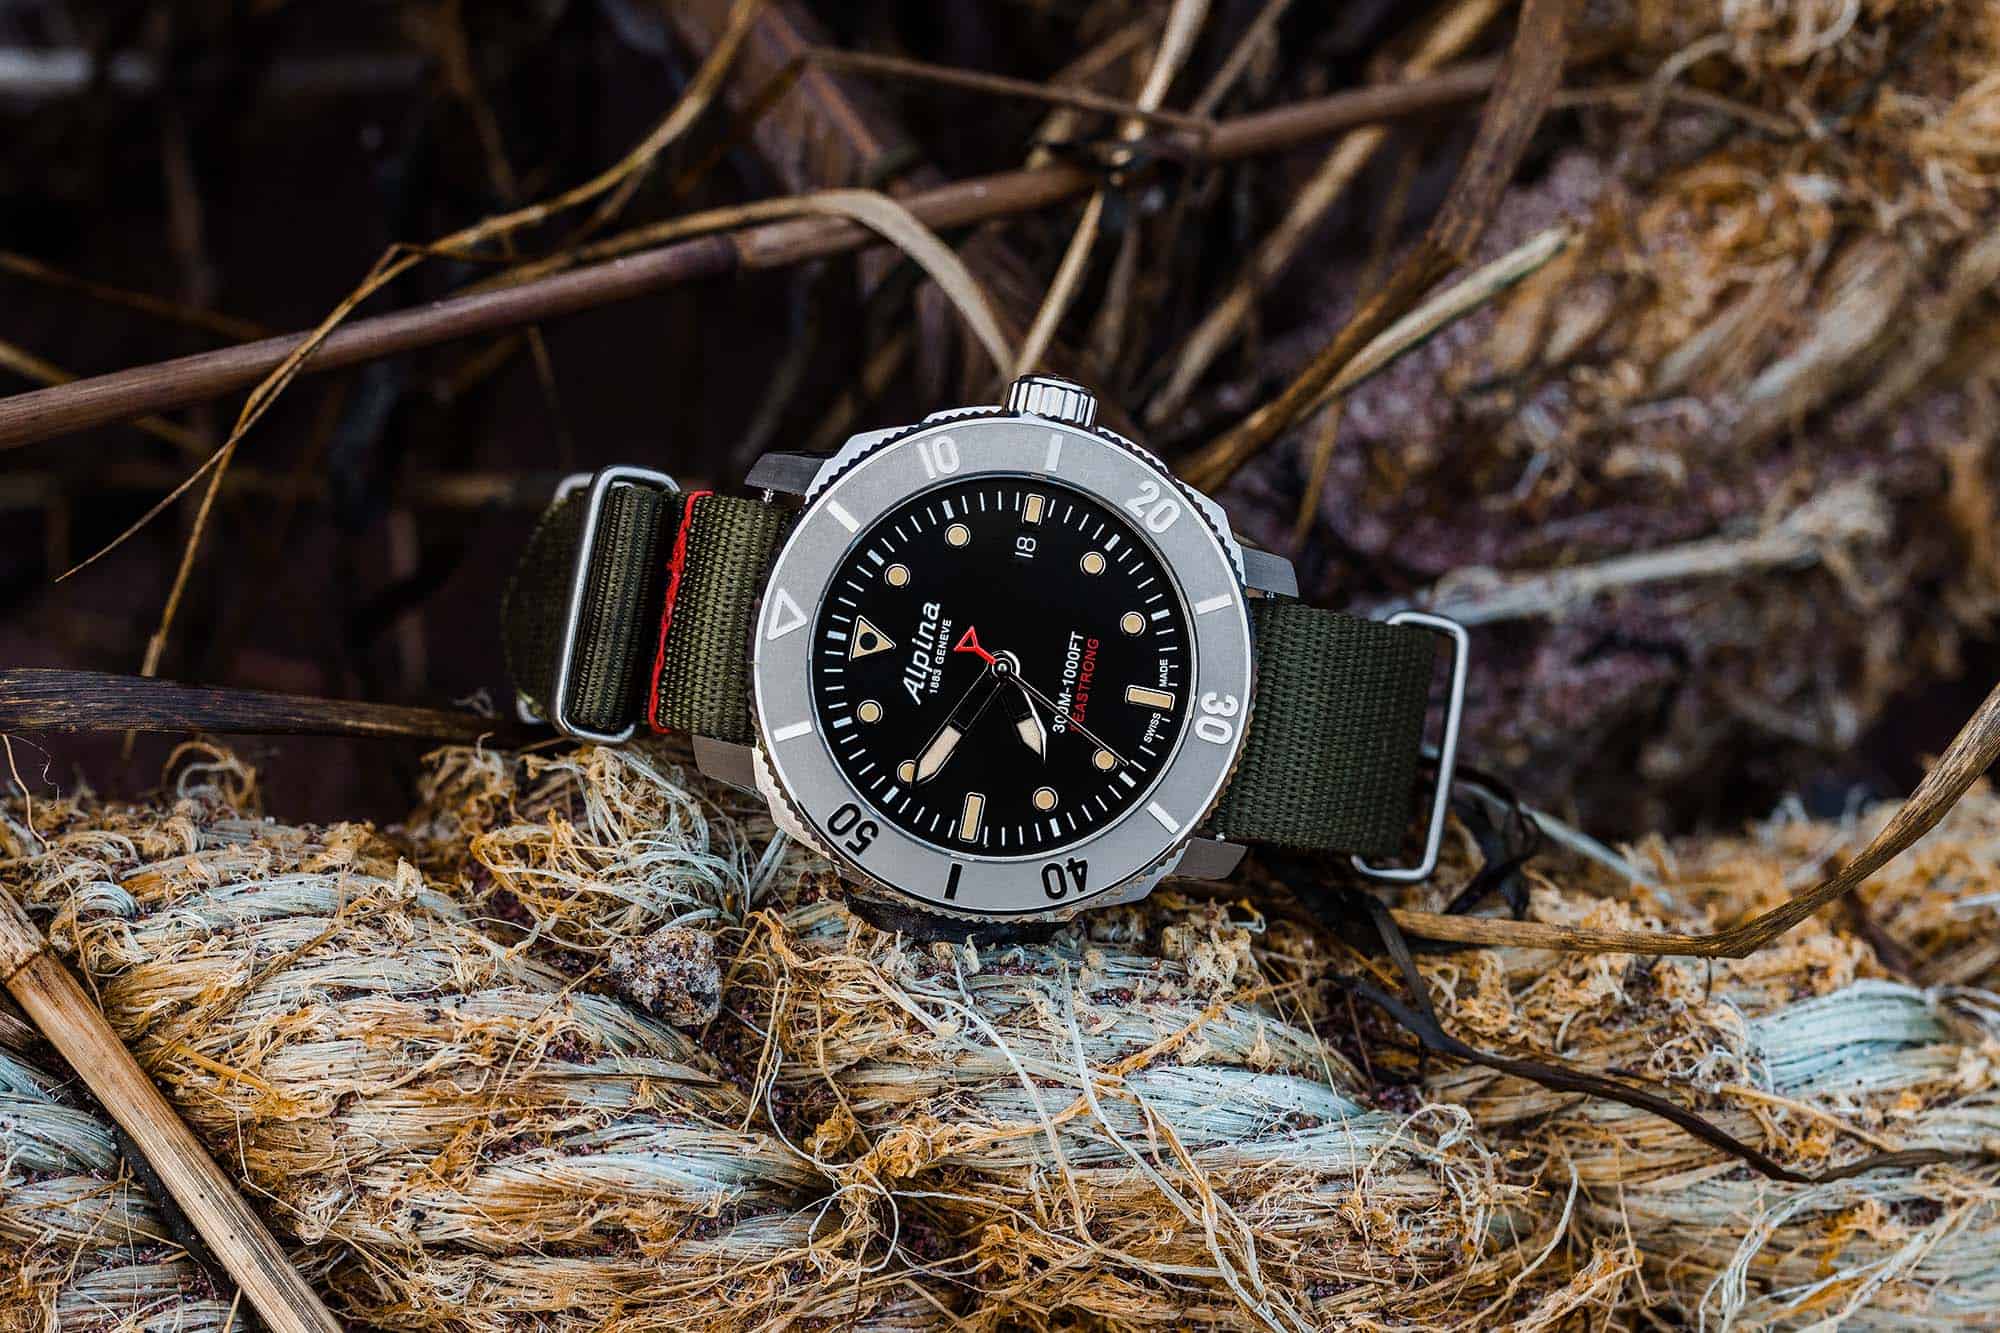 Tool/Kit: Surfcasting on Long Island's South Shore with the Recycled Alpina  Seastrong Diver 300 Automatic Calanda - Worn & Wound